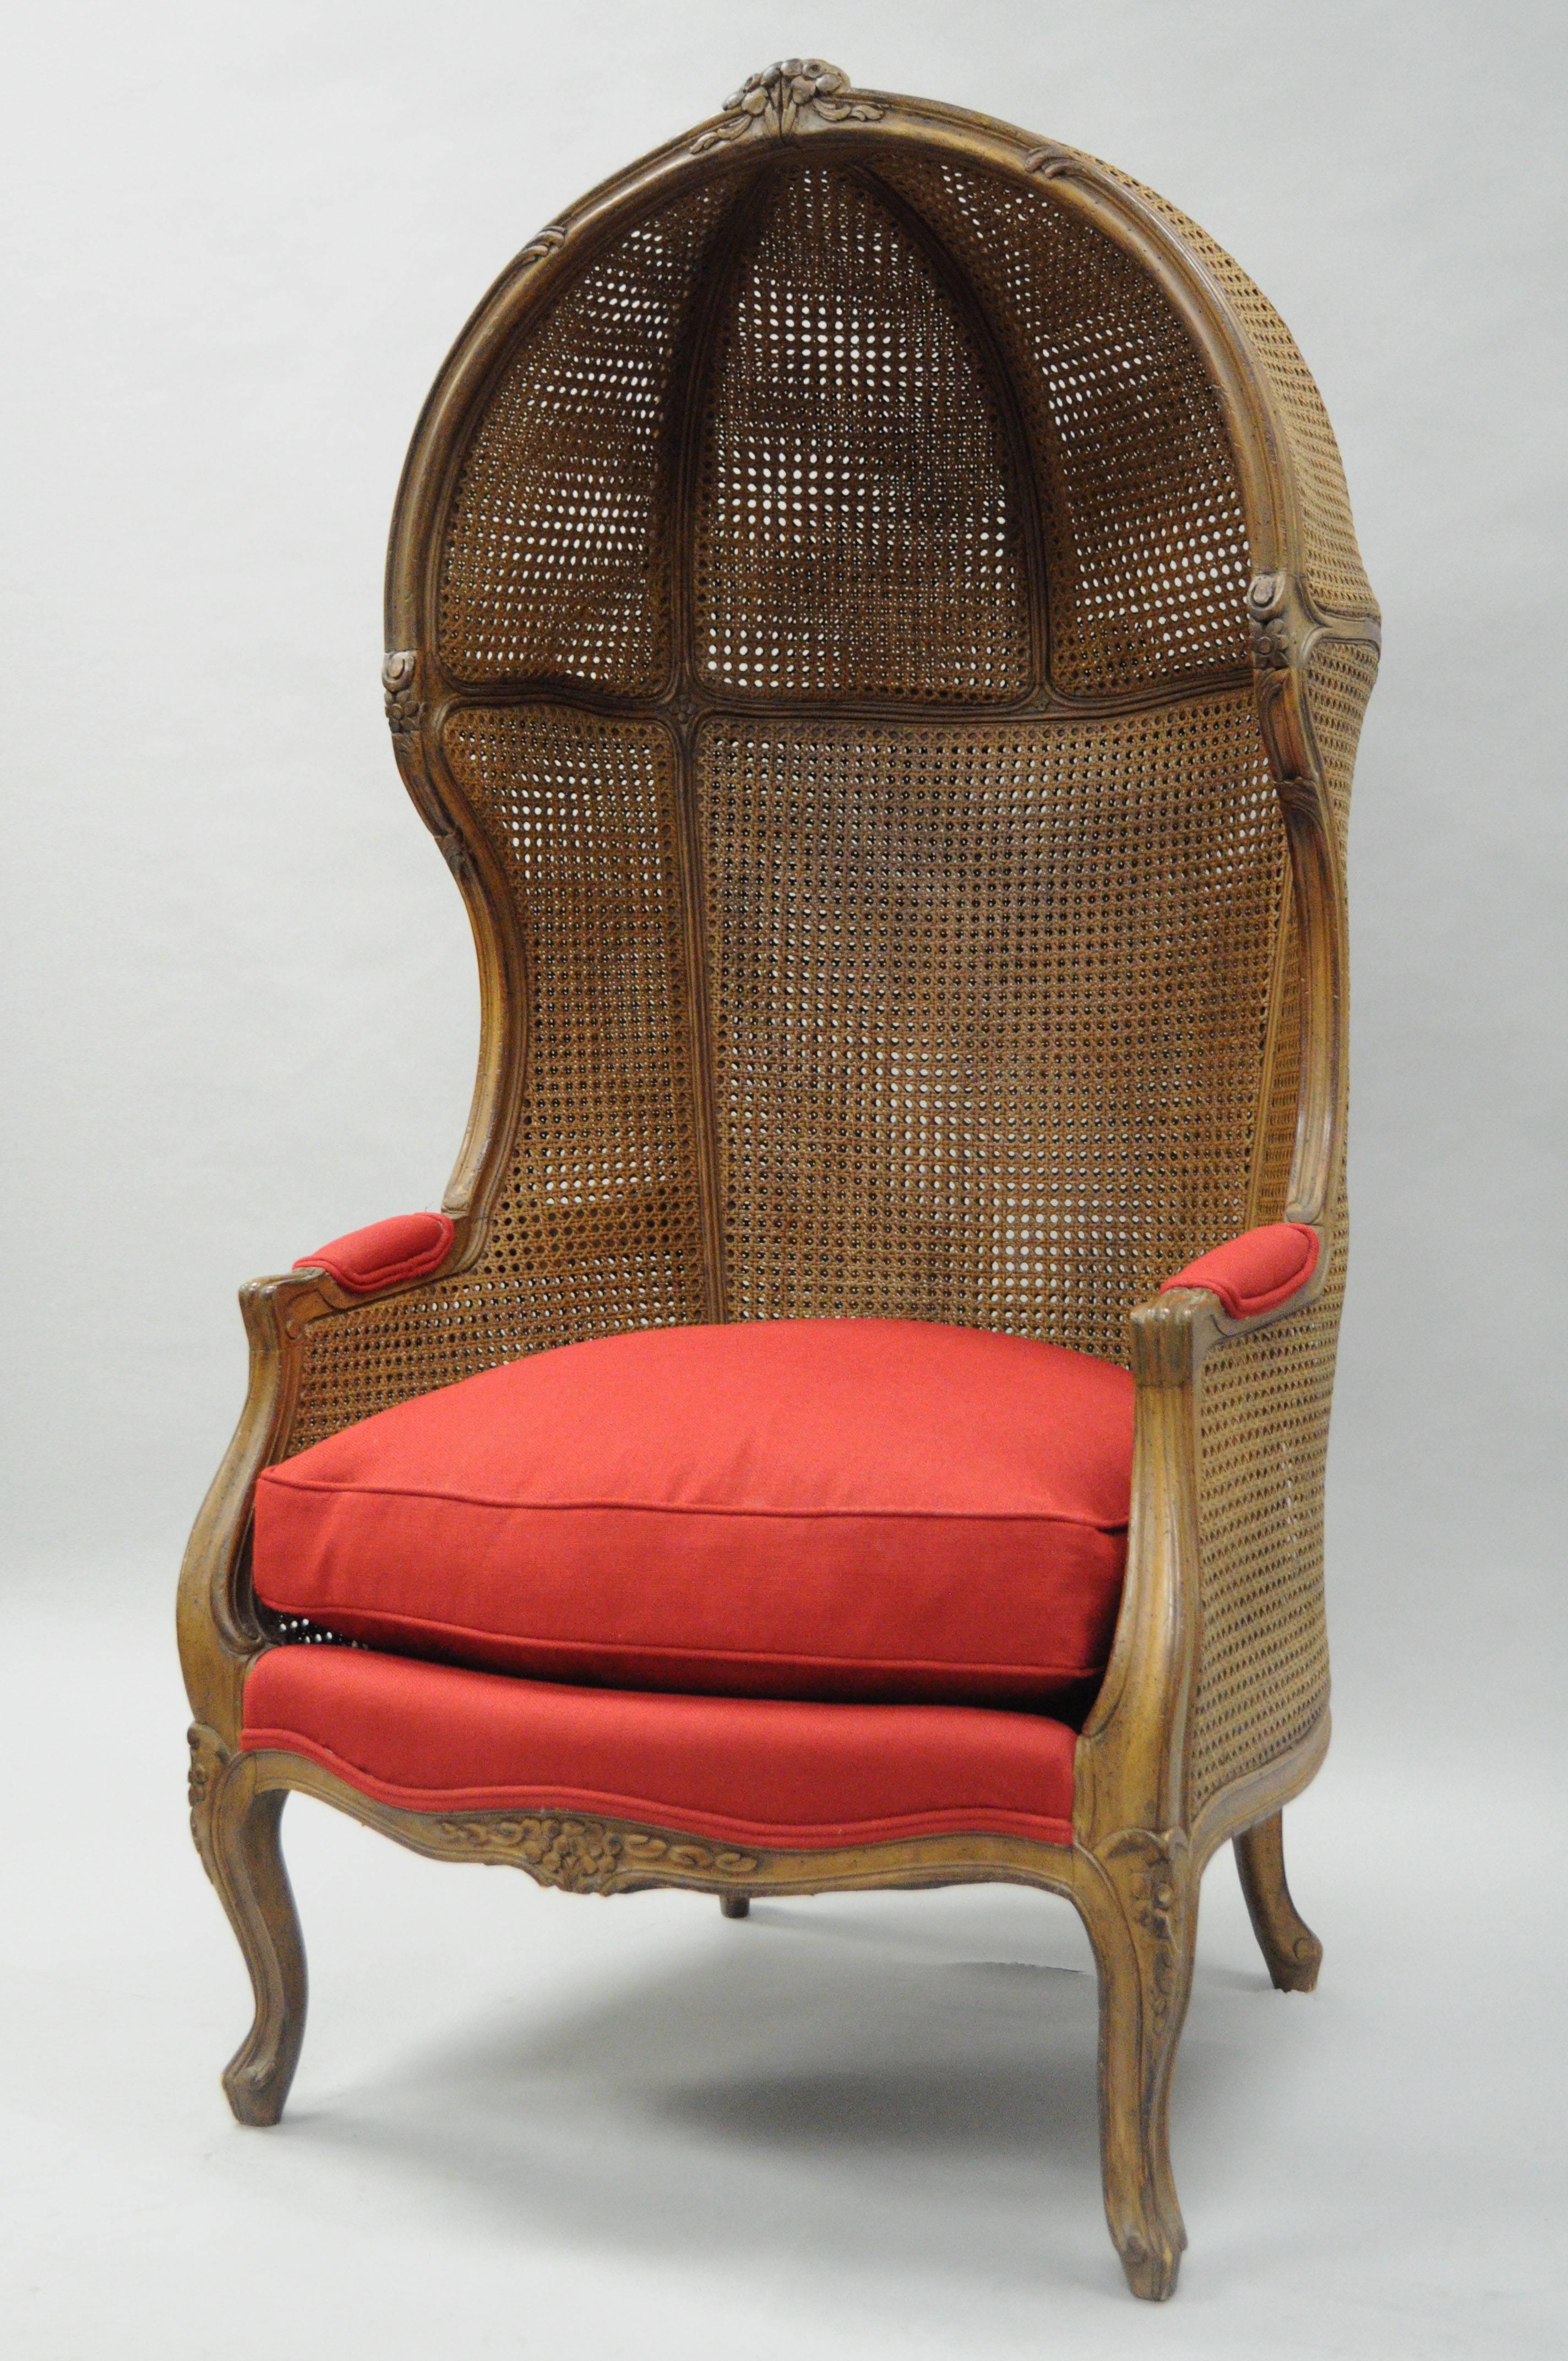 Vintage French Country / Louis XV style double cane Italian canopy Porter's chair. Item features a double caned solid carved walnut Italian frame, red upholstery, down filled loose cushion, Classic French style.